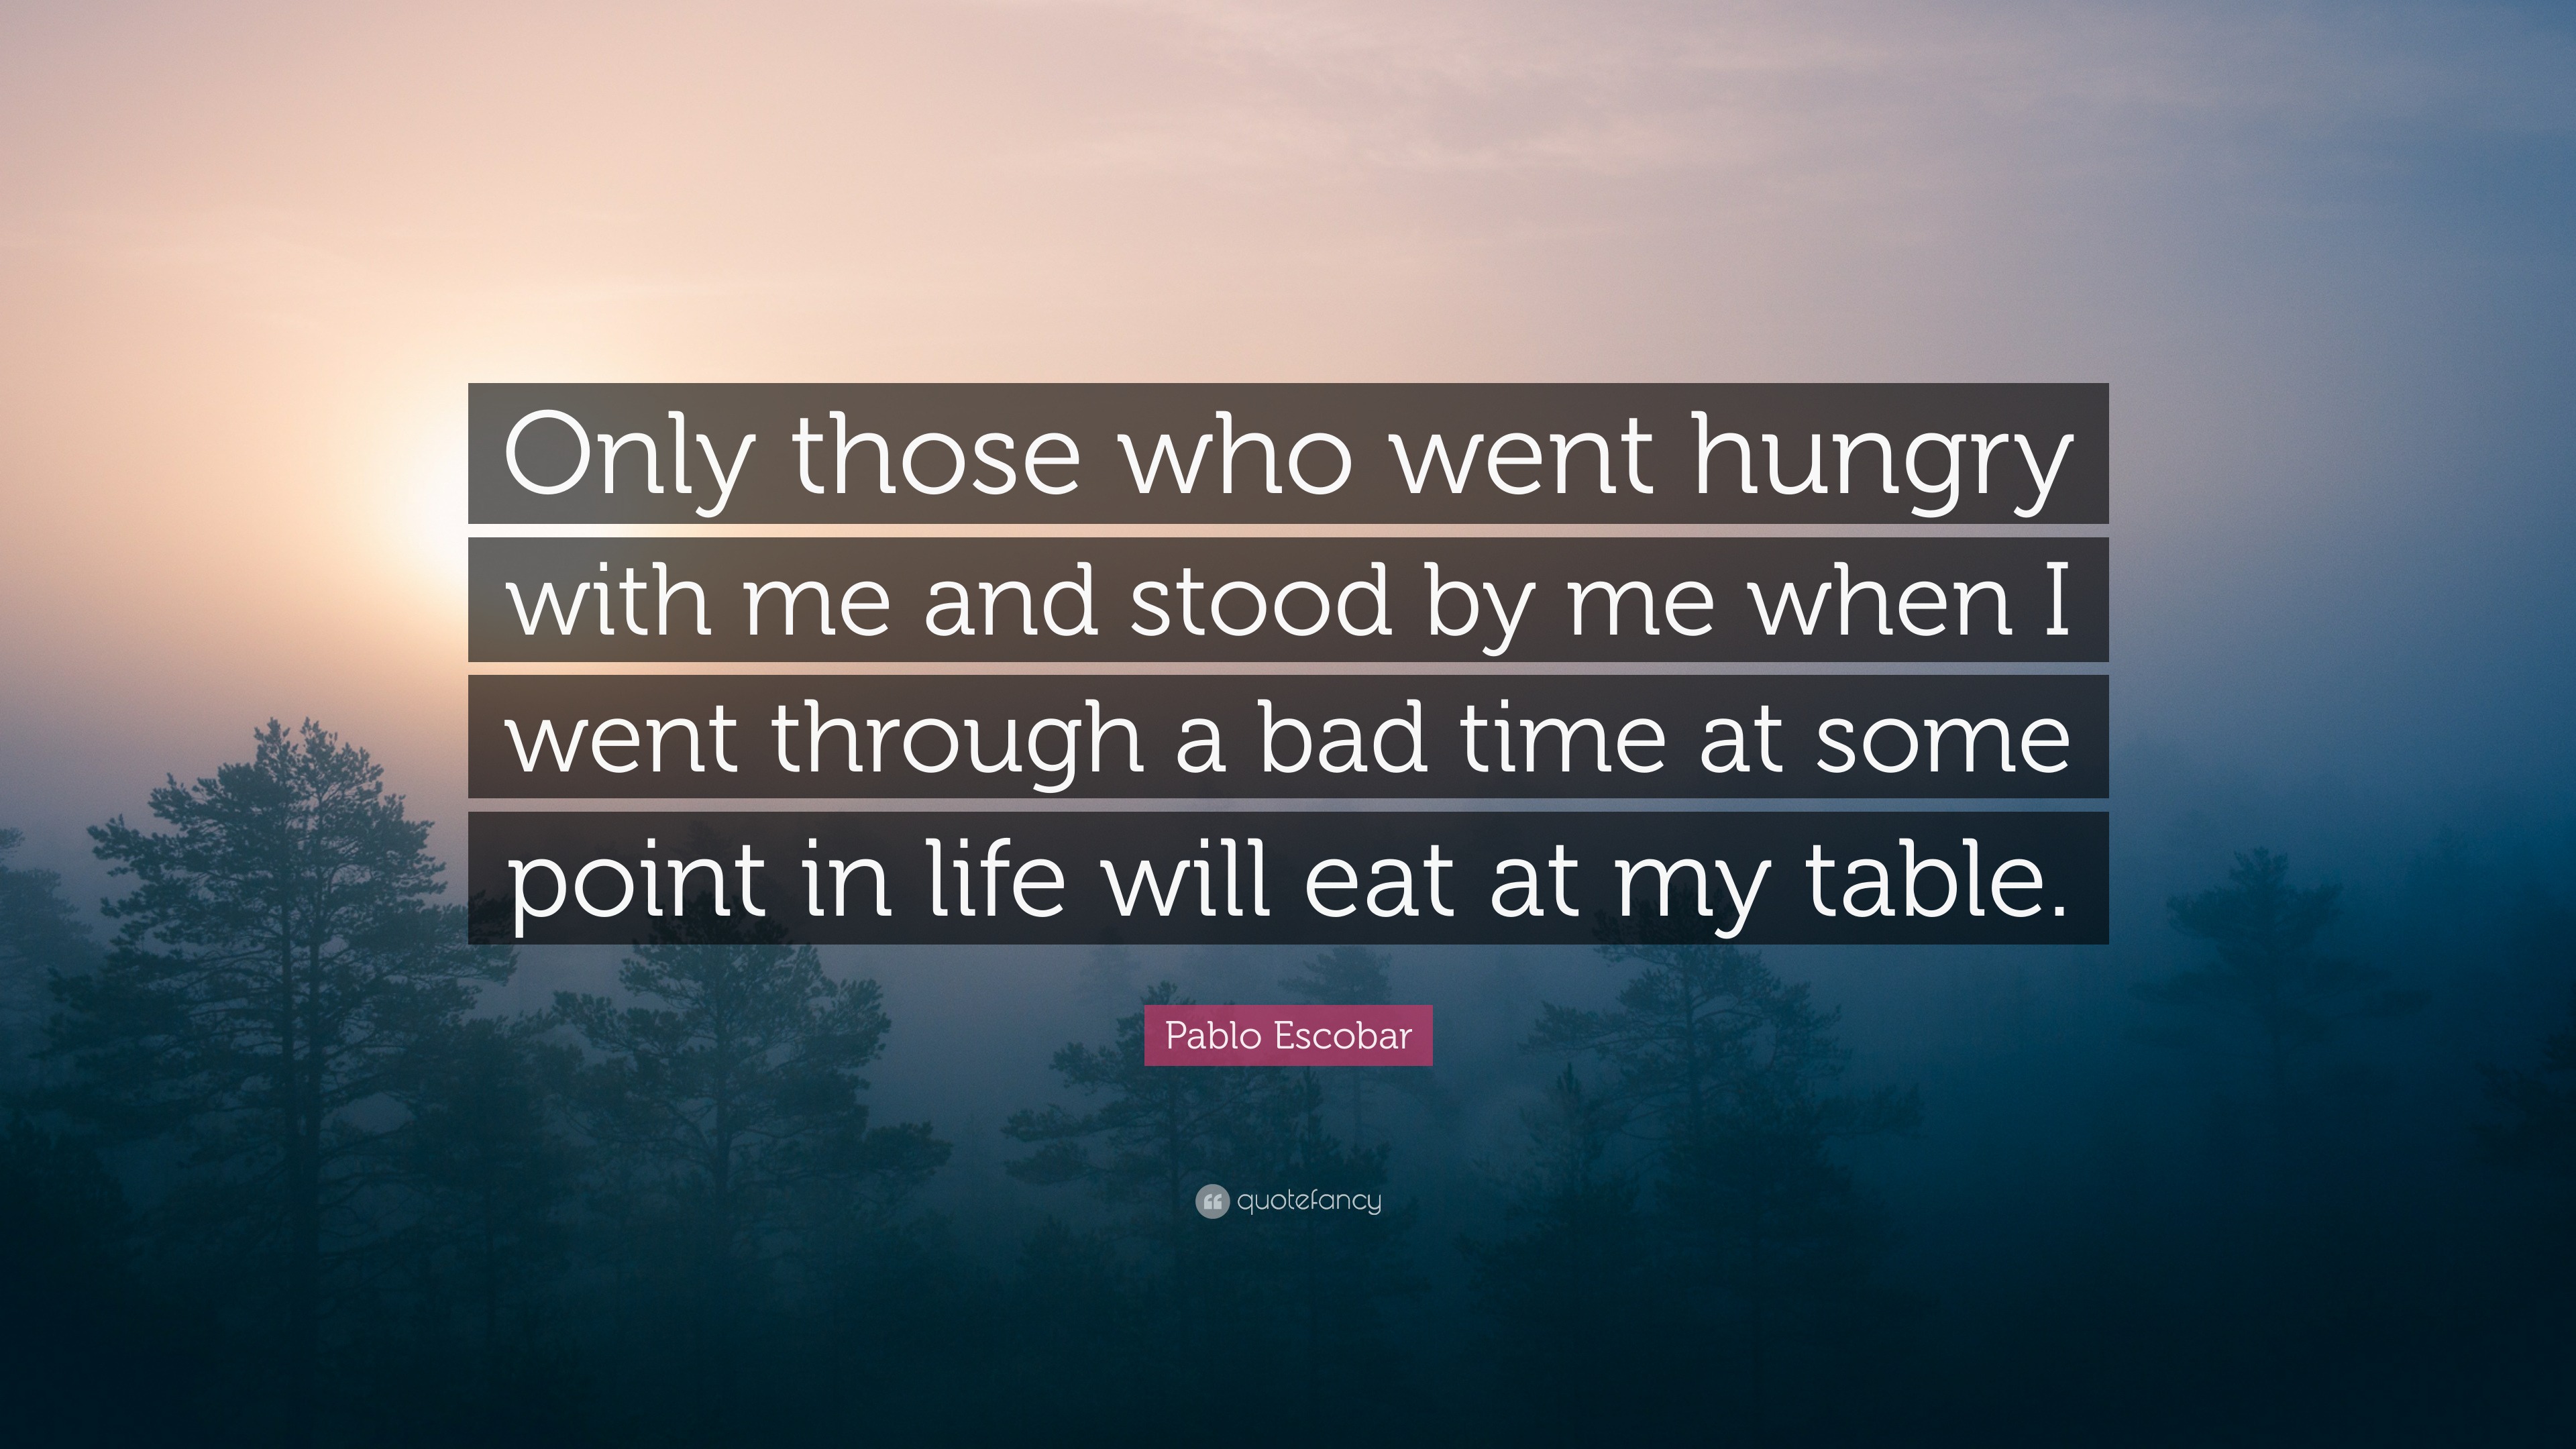 Pablo Escobar Quote: “Only those who went hungry with me and stood by